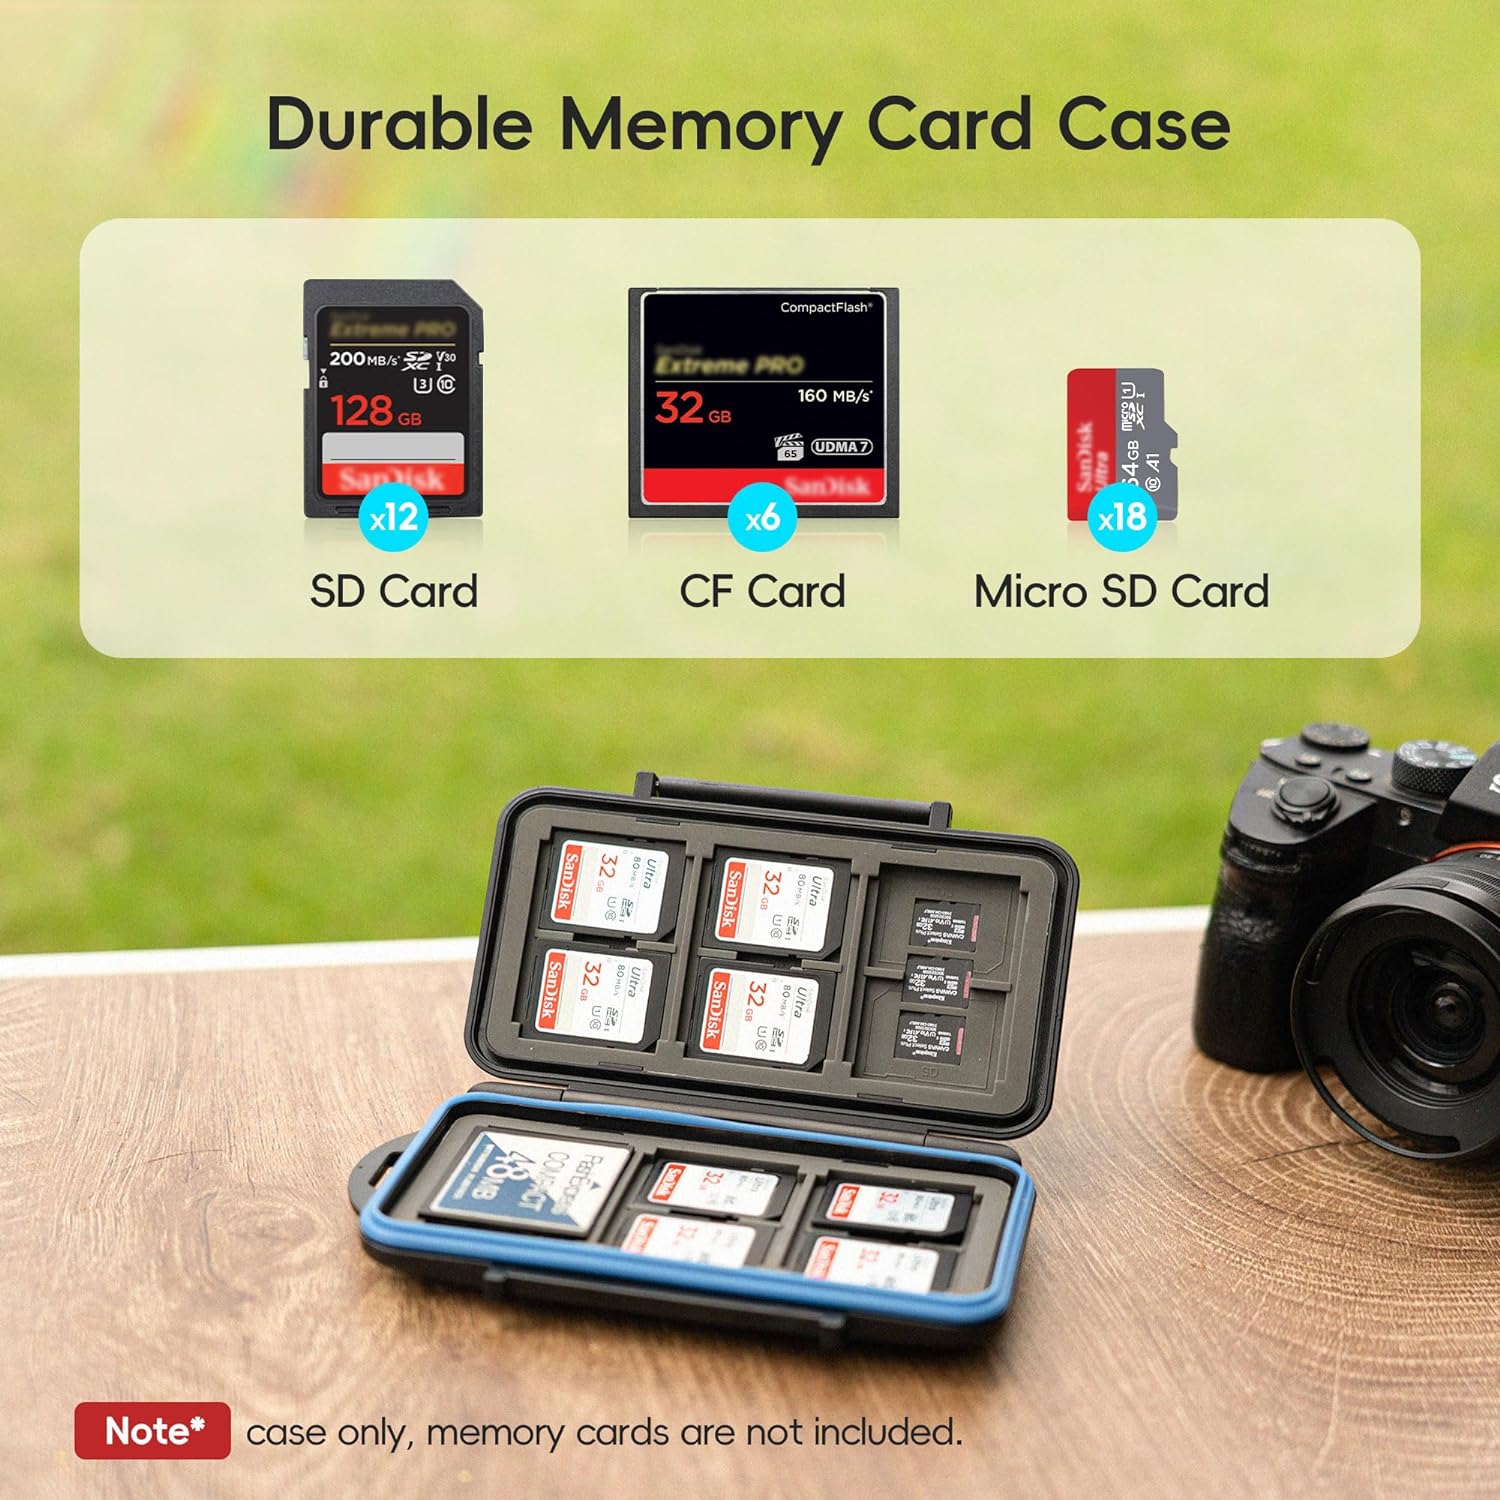 JJC CF Card Case SD Card Case Micro SD Card Case TF Card Case CF Card Holder SD Card Holder Micro SD Card Holder TF Card Holder for 6 CF & 12 SD & 18 Micro SD Card,Water-Resistant and Shockproof